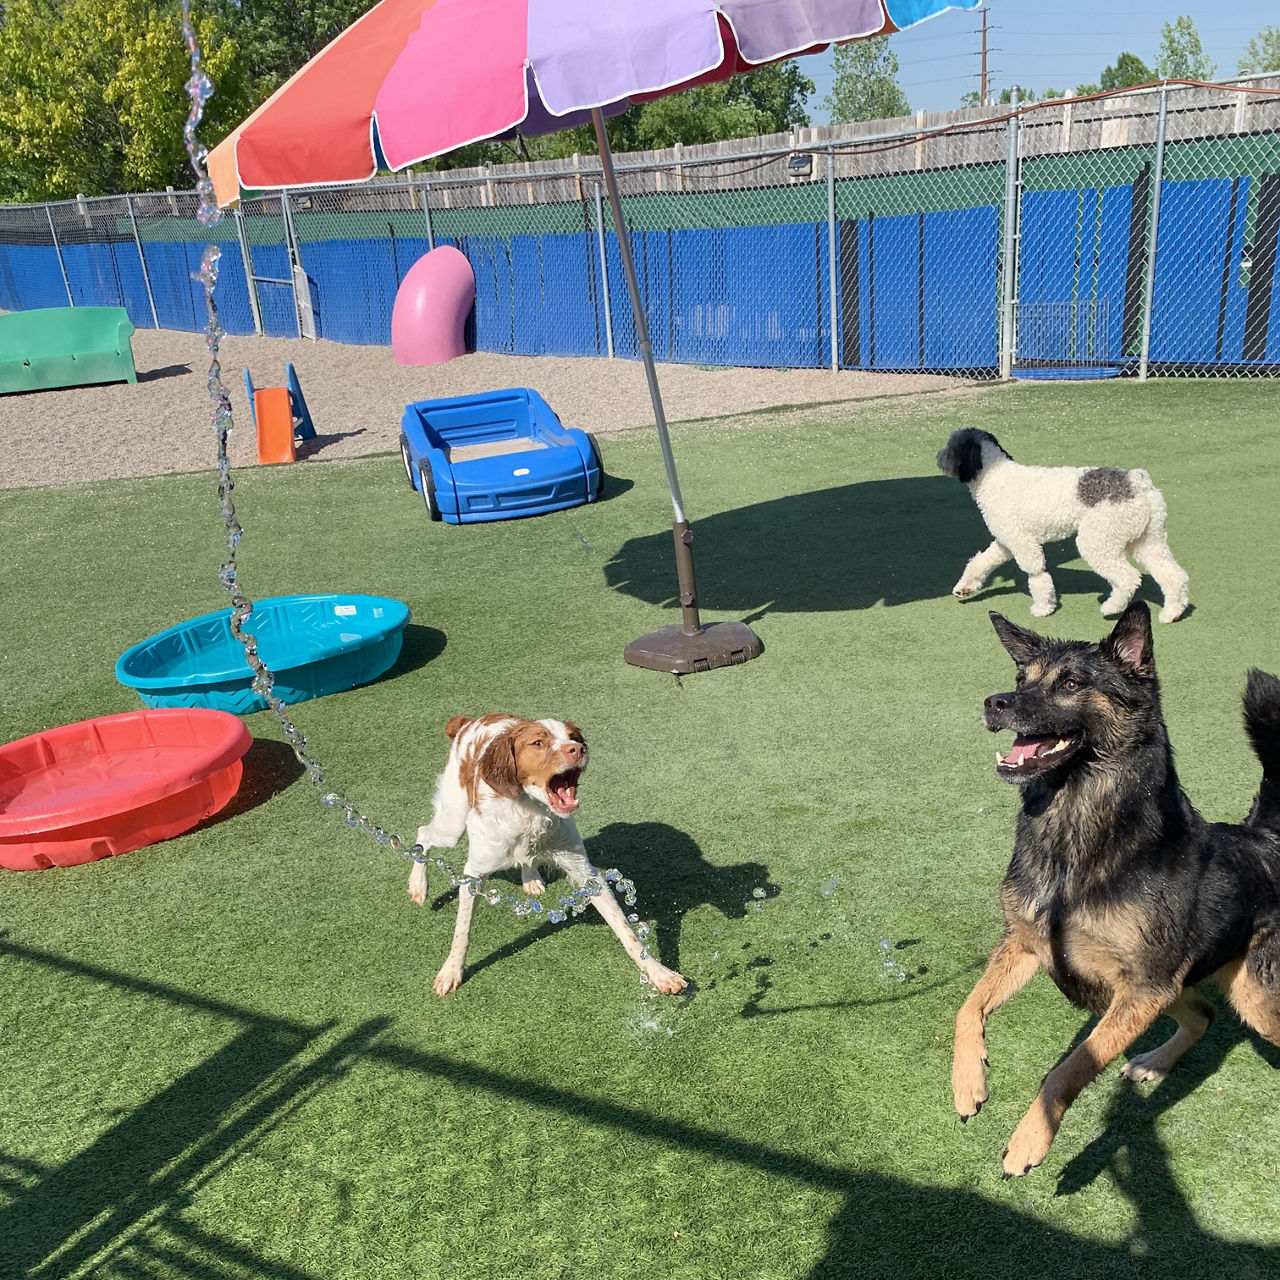 Dogs in playground